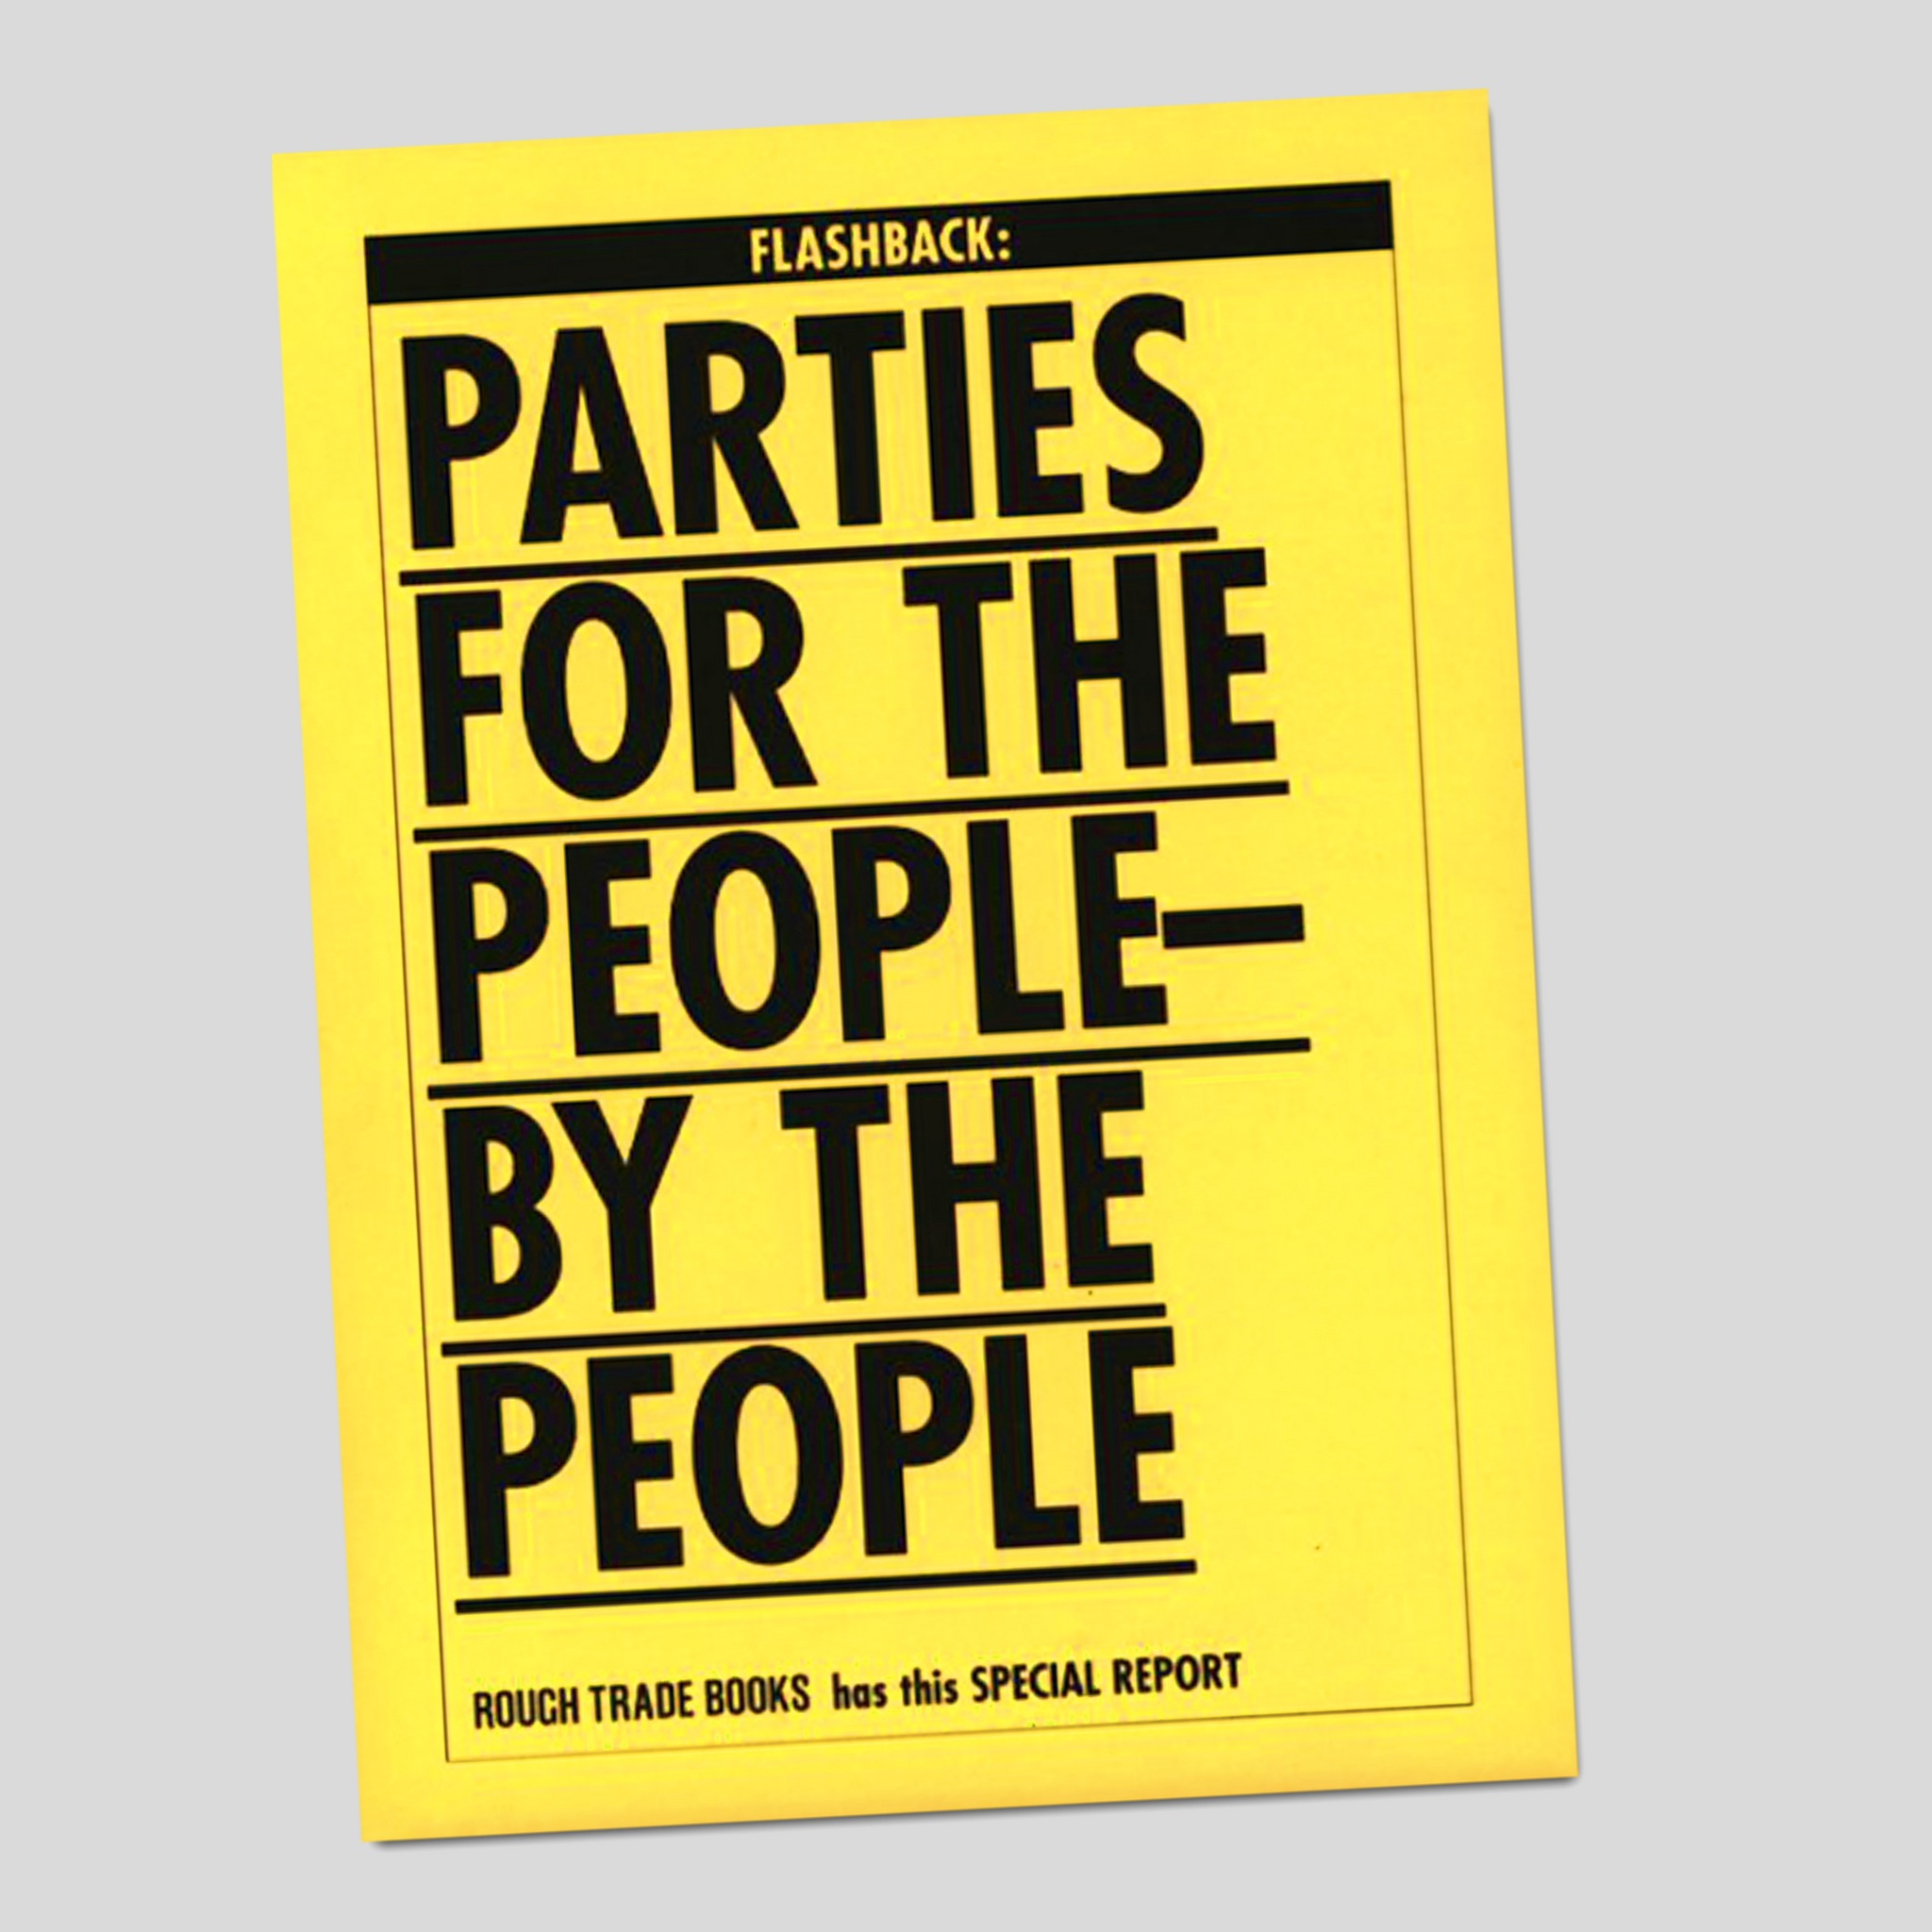 Flashback: Parties For The People By The People